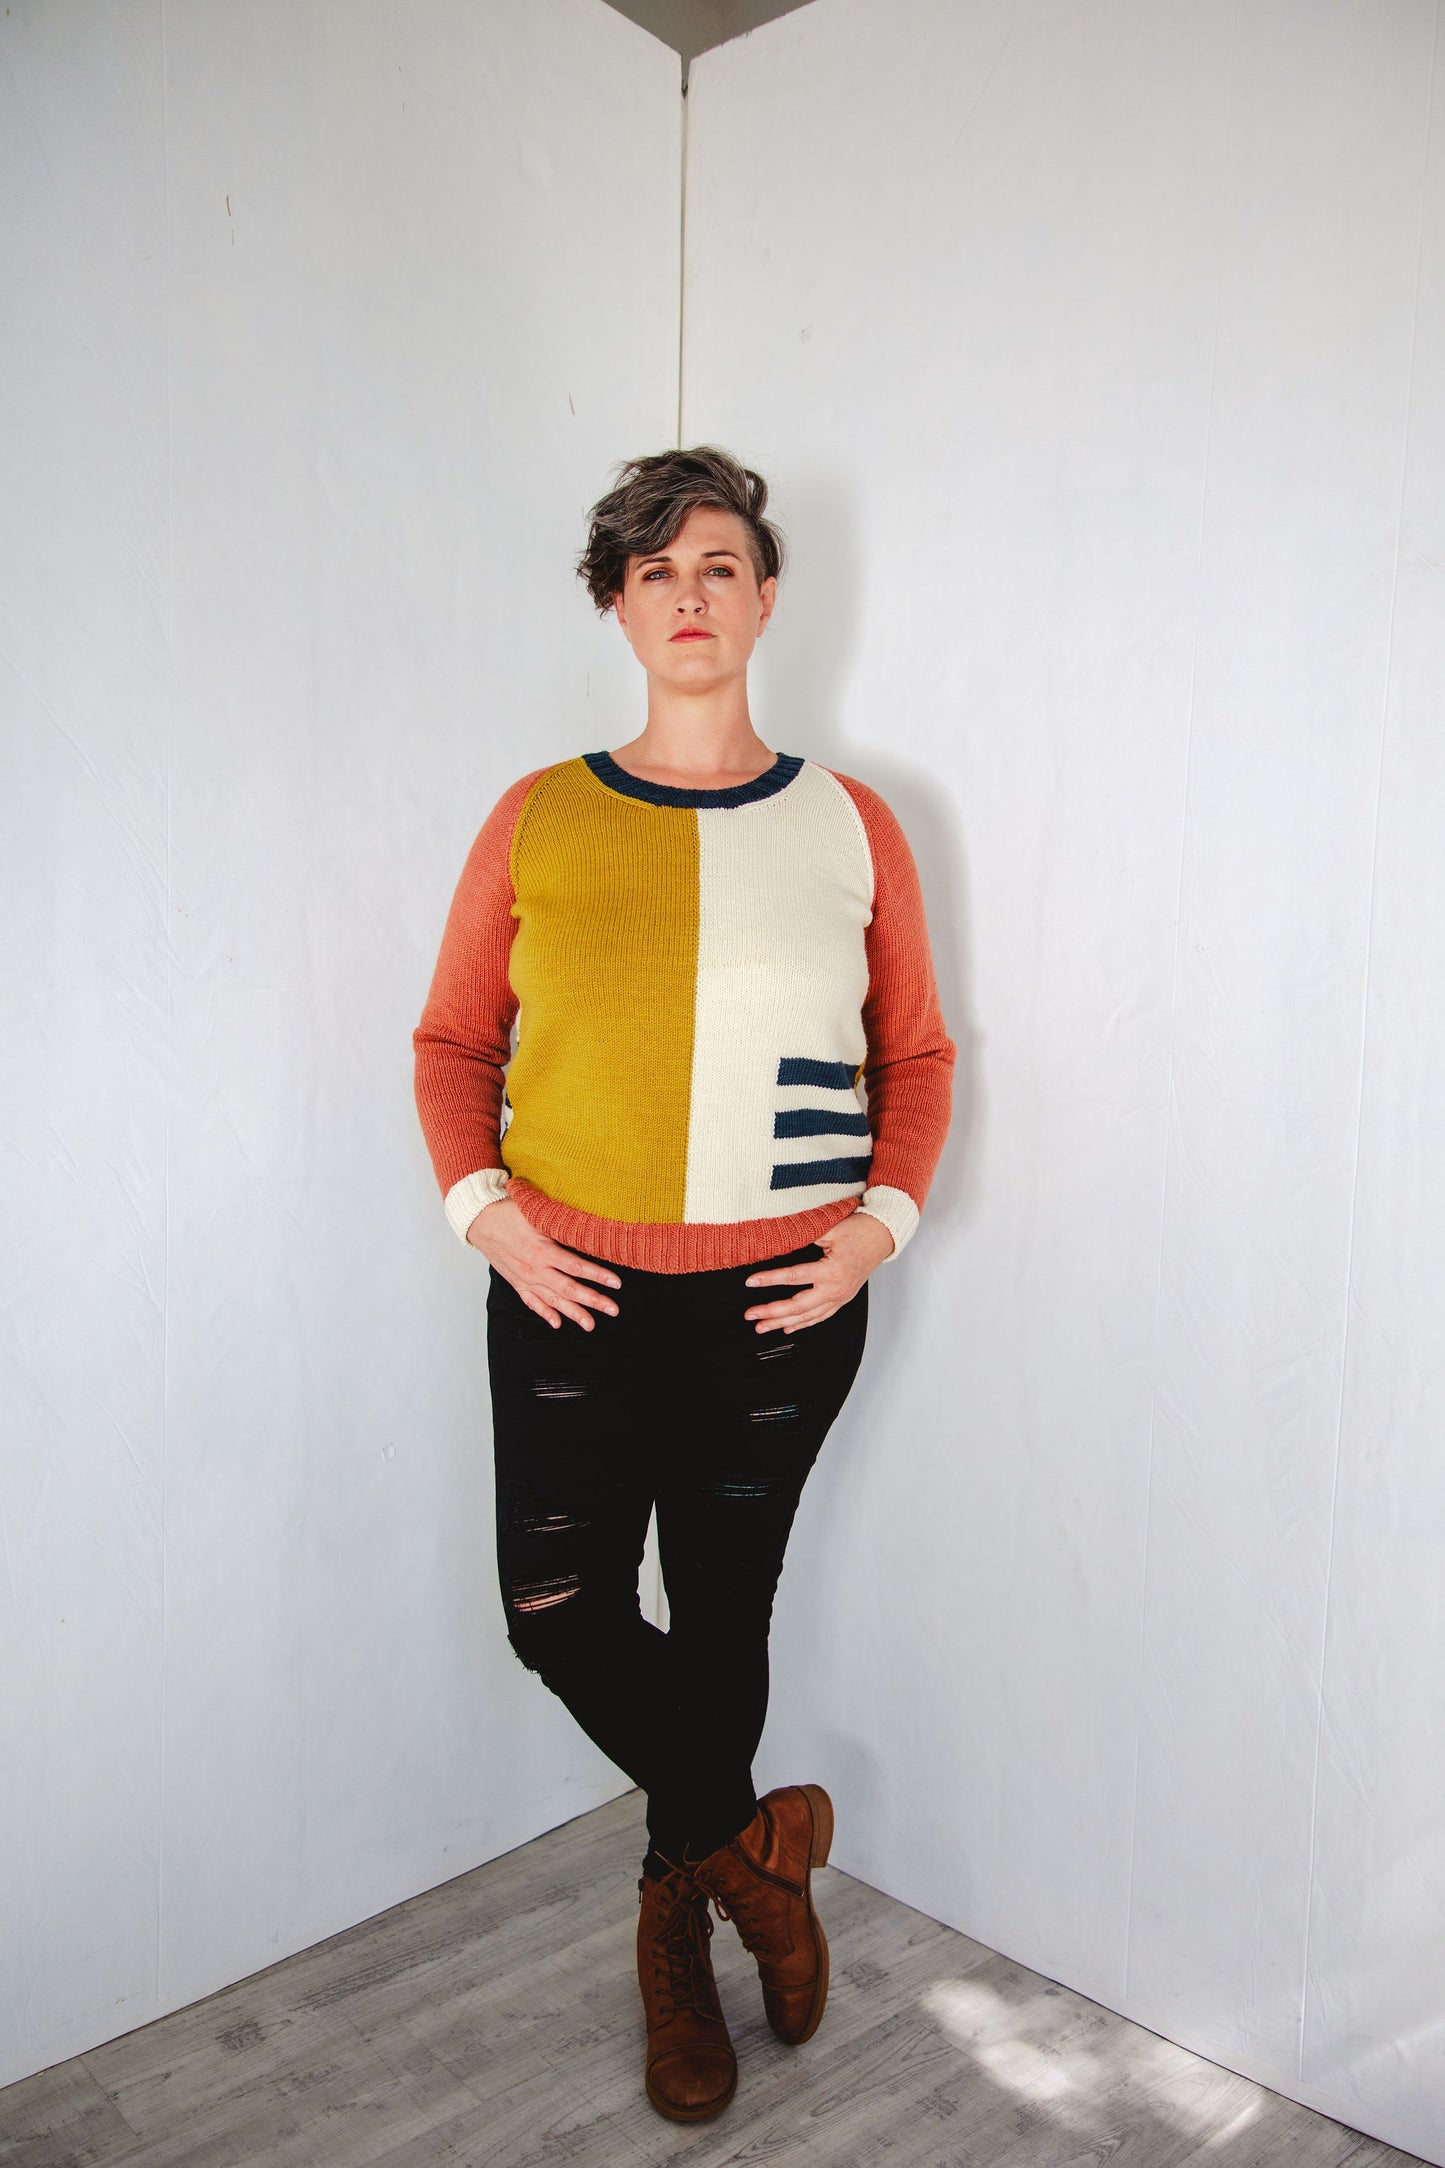 Jen stands, hands in the pockets of her black jeans, looking at the camera. Her hand knit sweater features color blocks of ochre, white, navy blue, and pink, knit using intarsia techniques.